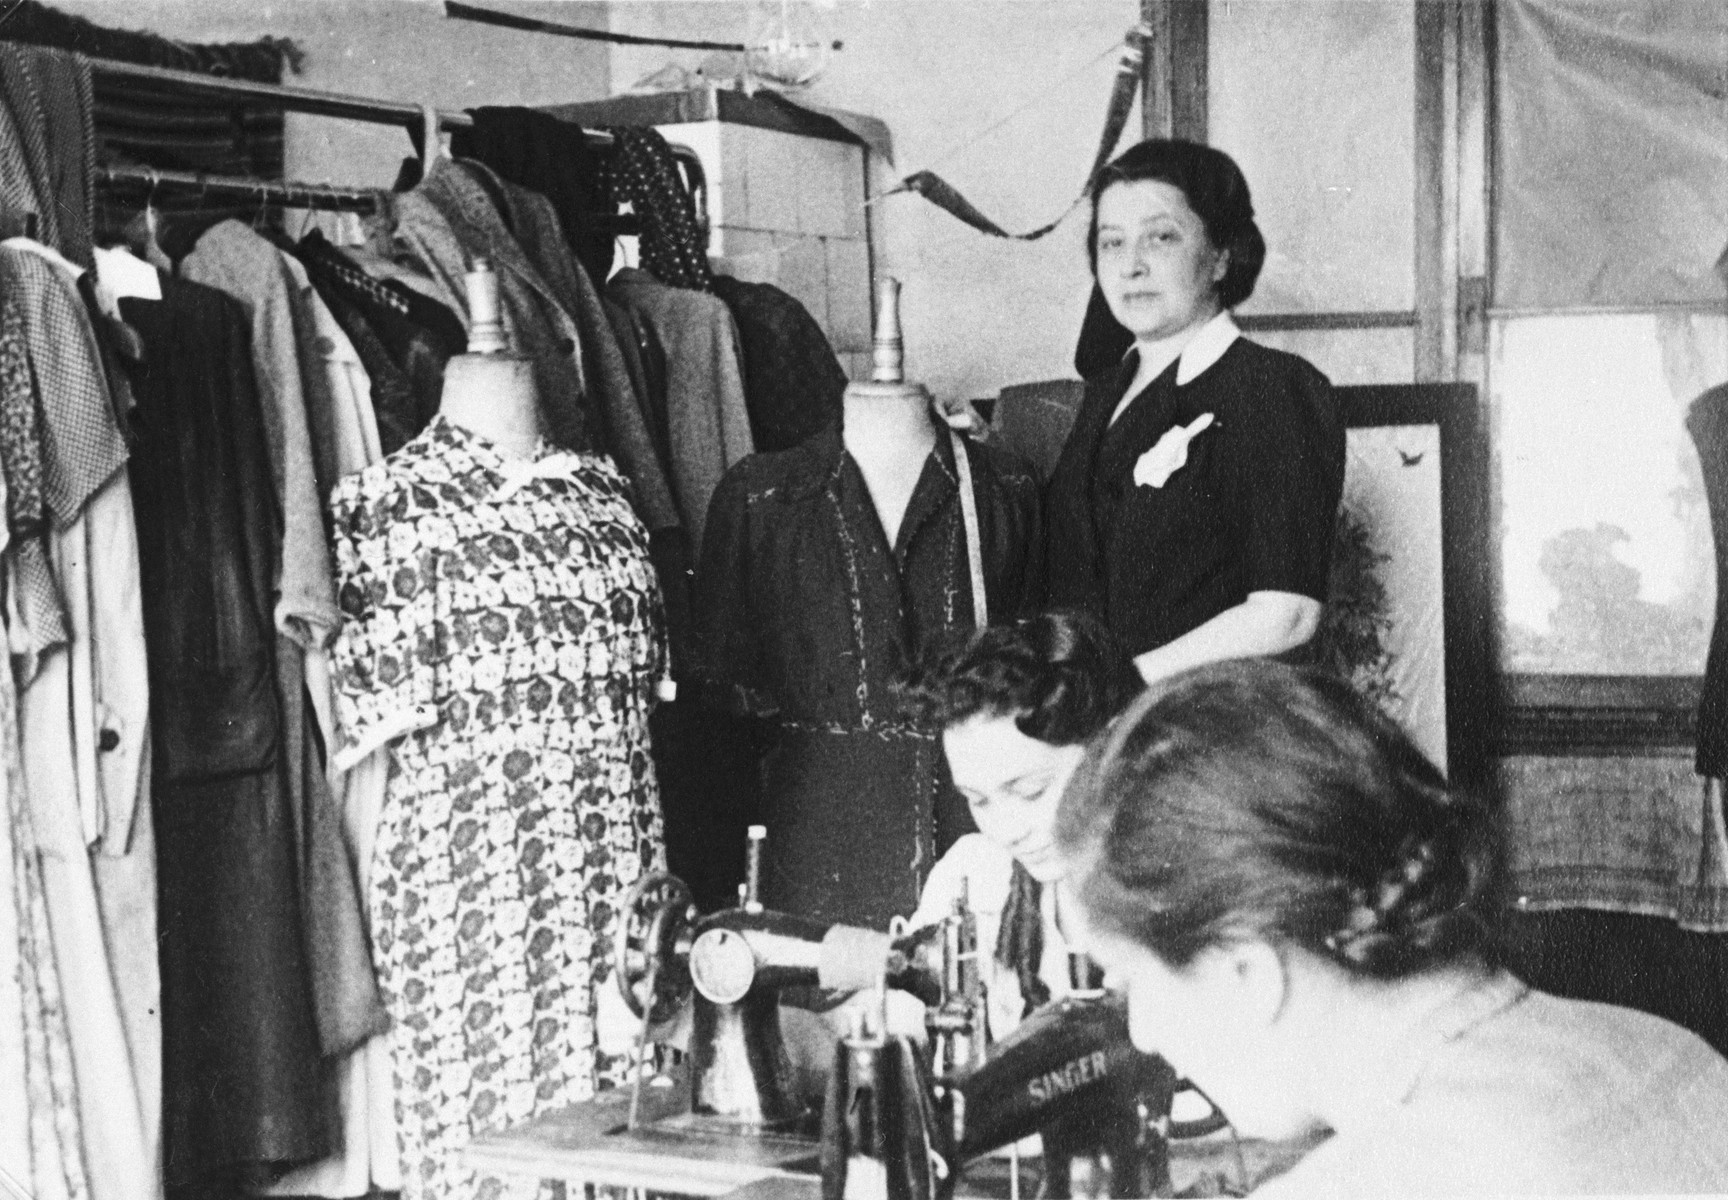 Female employees work in the Julius Madritsch Ladies' Custom Shop.

Standing is the manager Mrs. Minder and seated at the machine is Dziunia Eichenholz.